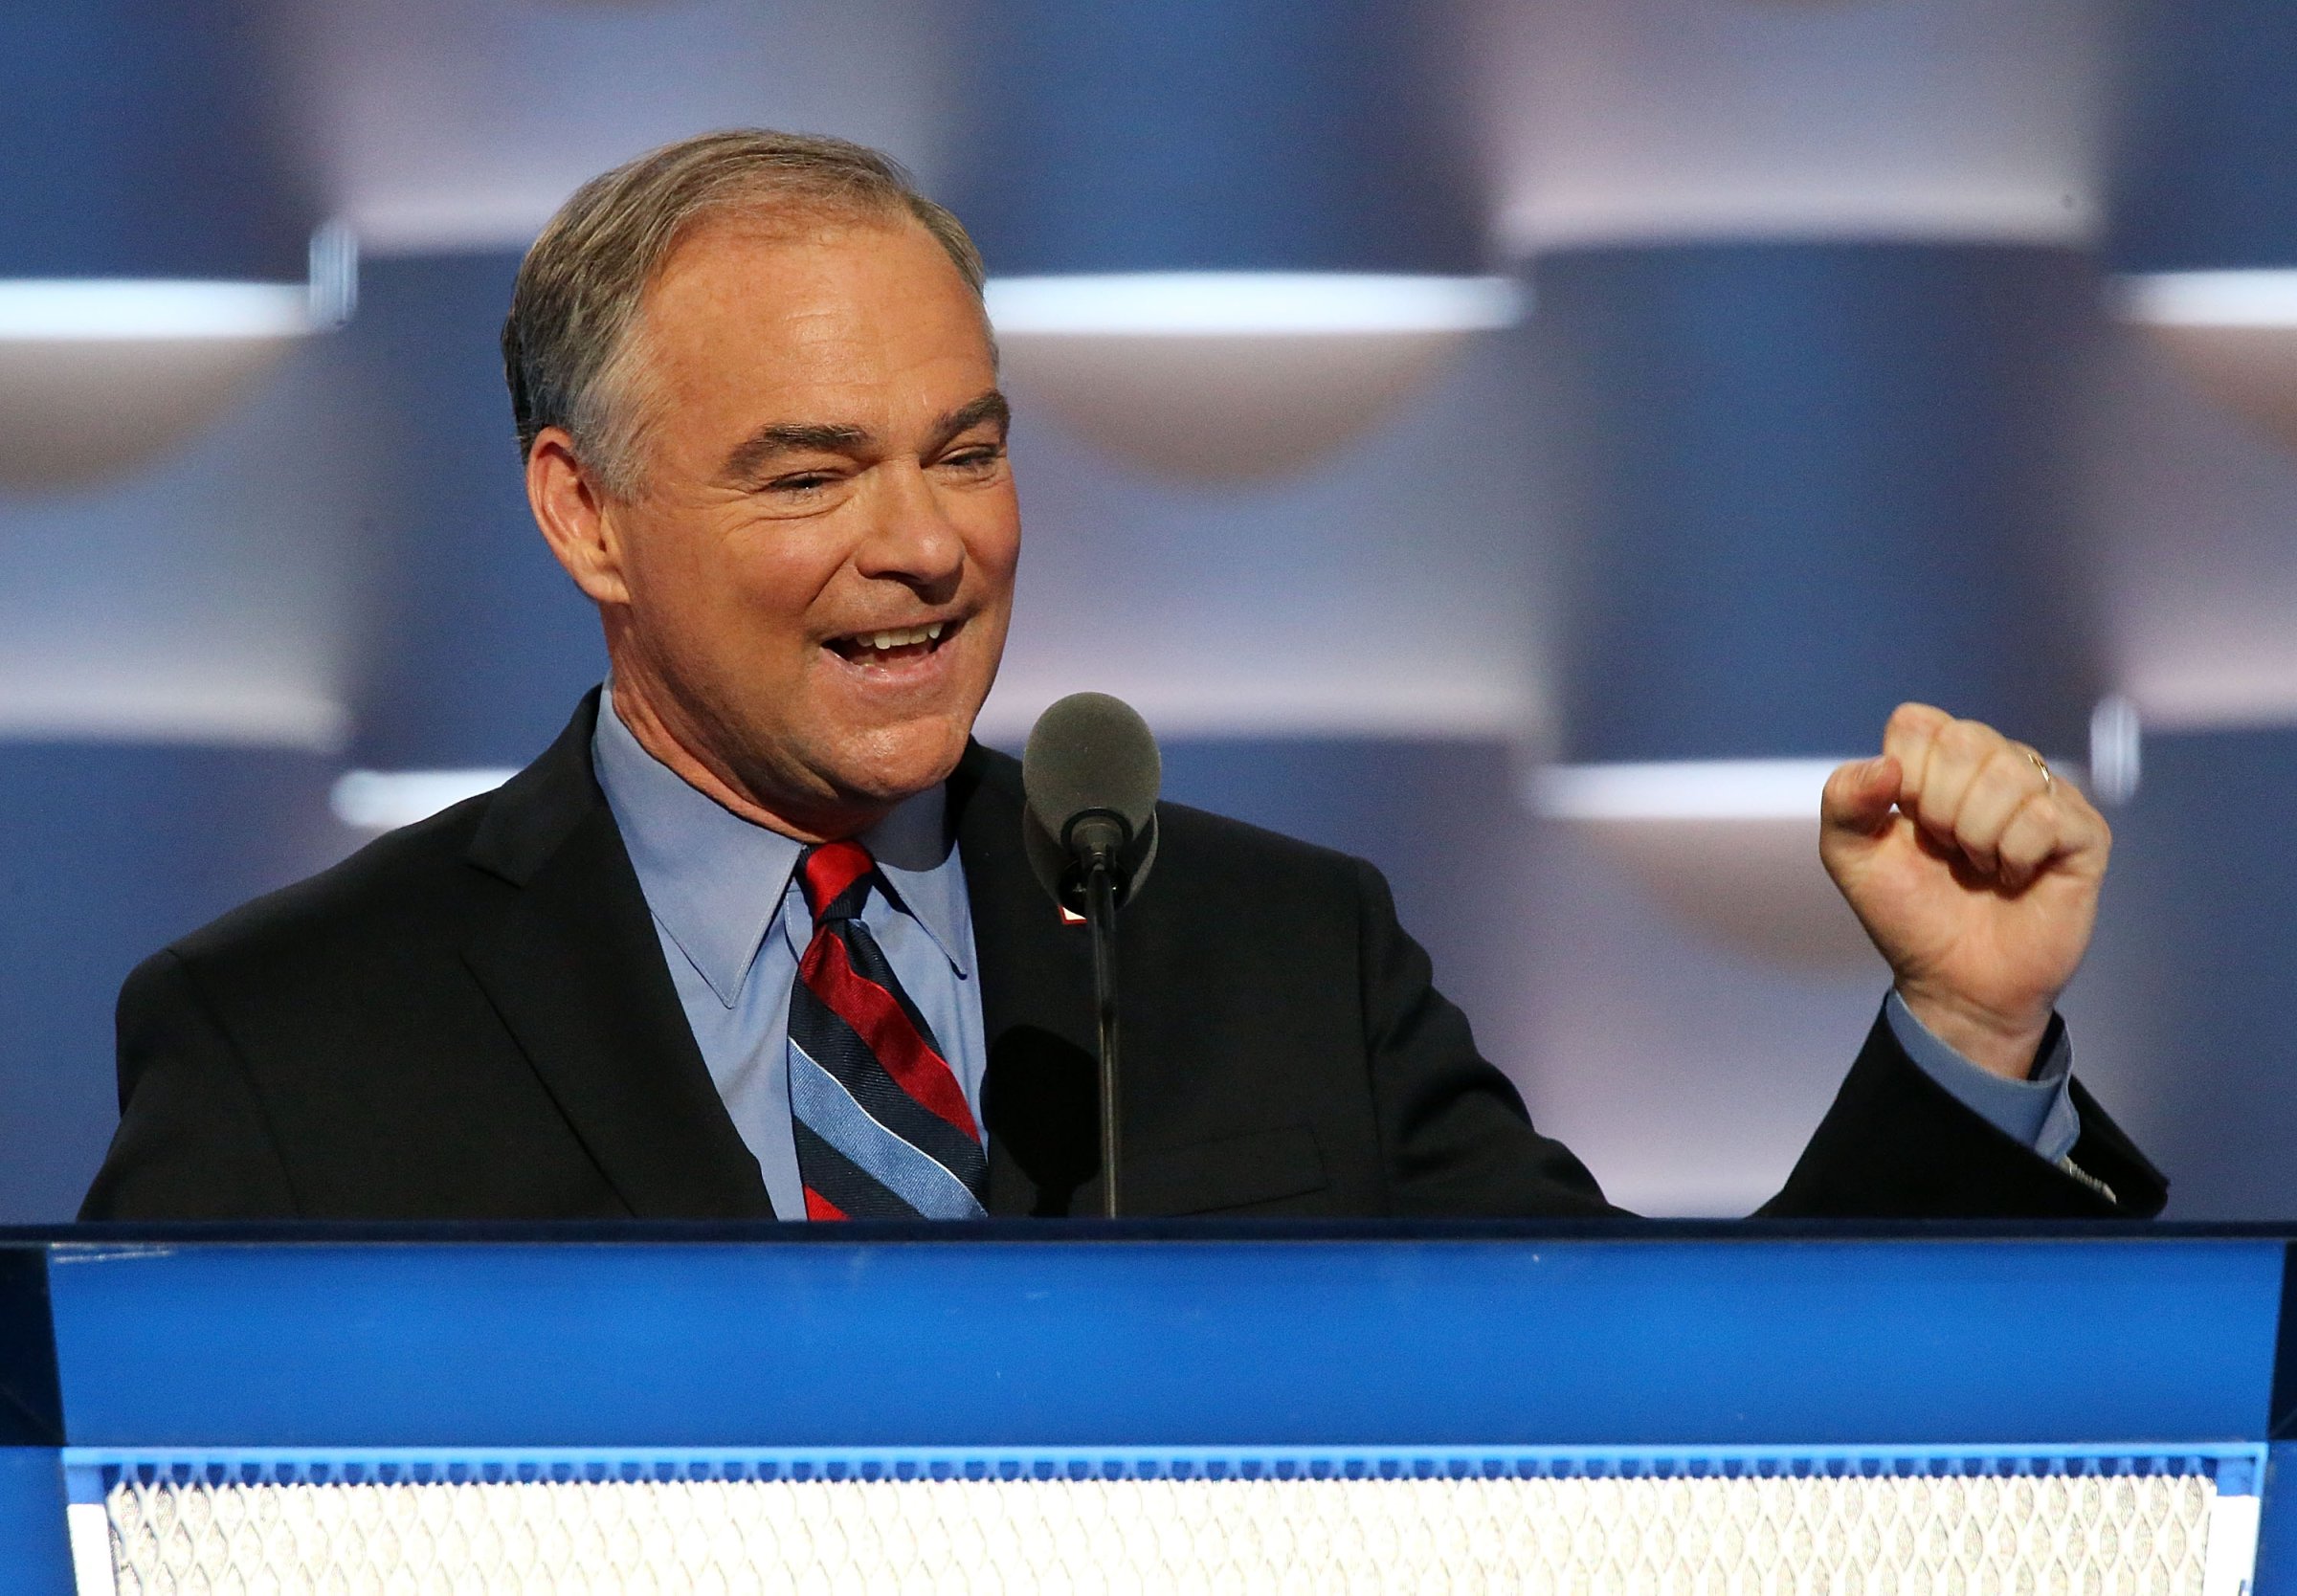 U.S. Vice President nominee Tim Kaine delivers remarks on the third day of the Democratic National Convention at the Wells Fargo Center on July 27, 2016 in Philadelphia, Pennsylvania.